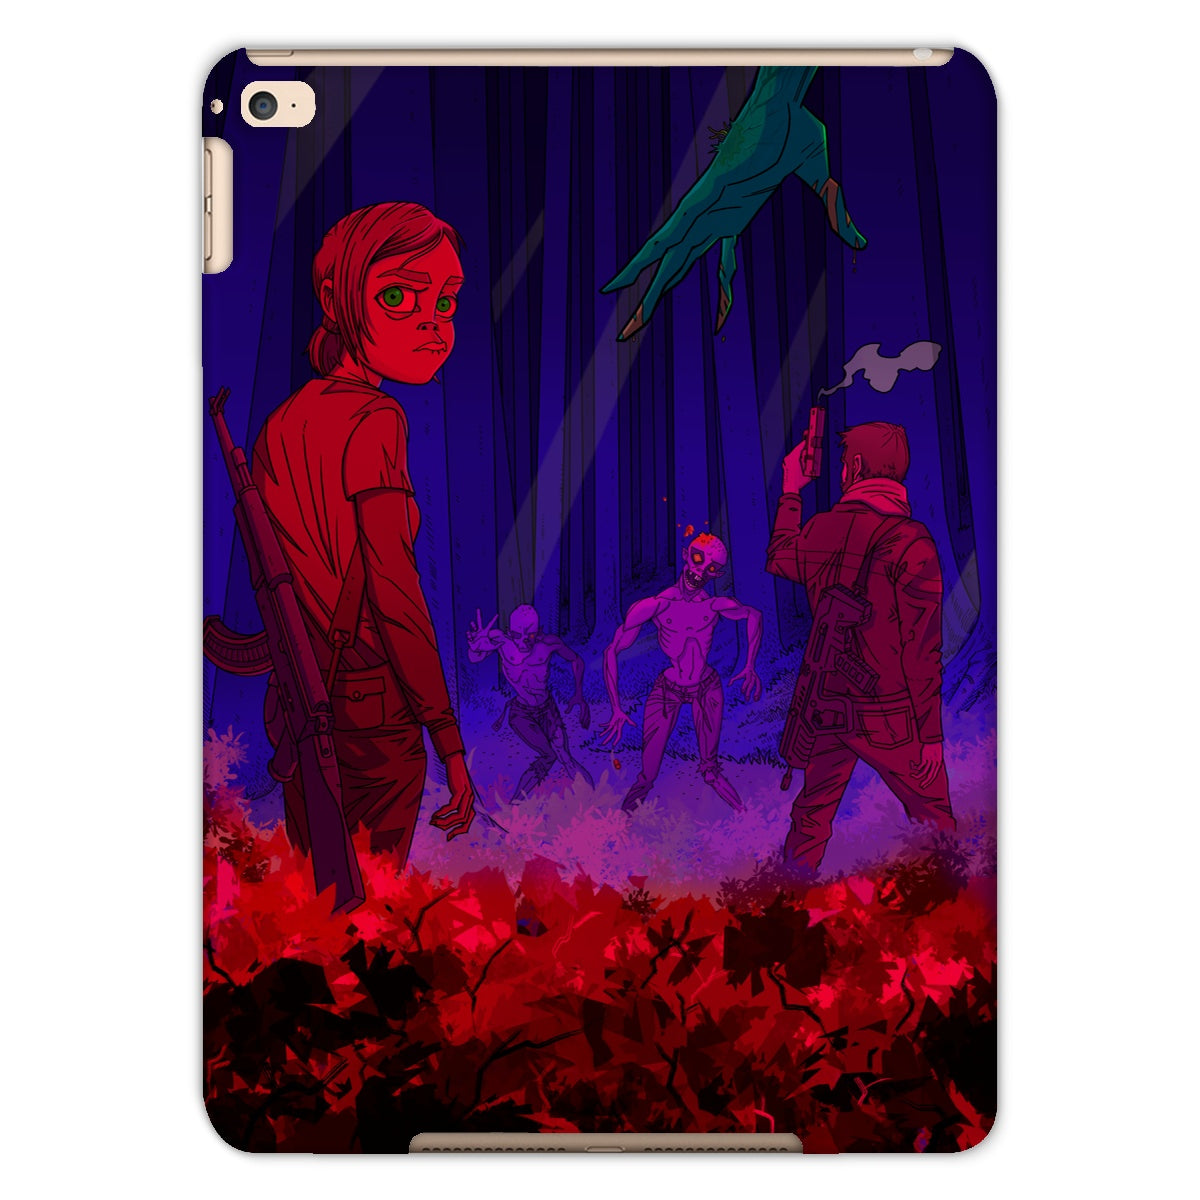 Unique and cool Gorillaz-style zombie game Tablet Case illustration 